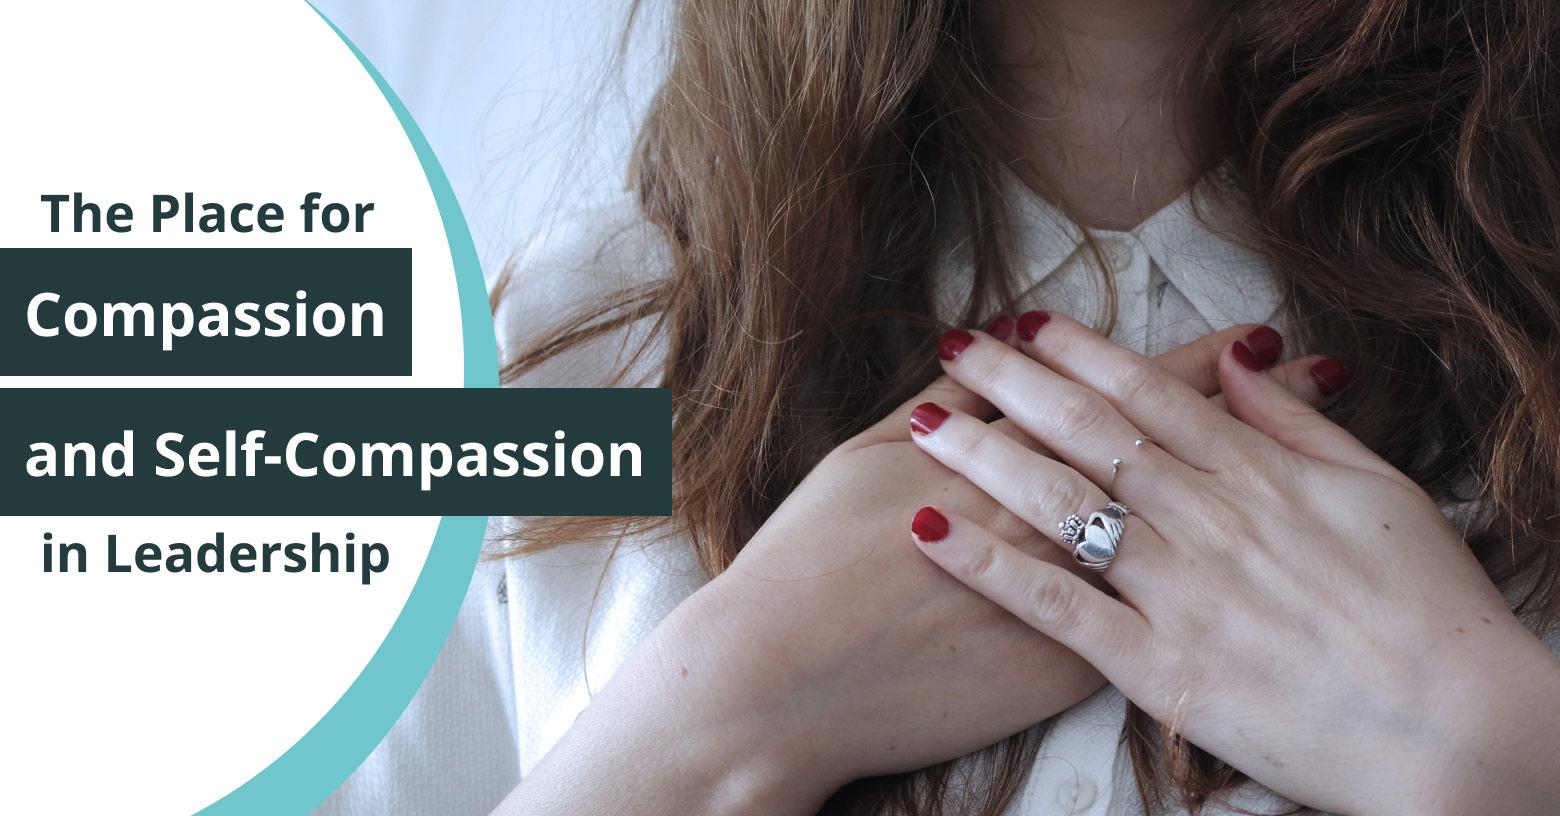 The Place for Compassion and Self-Compassion in Leadership